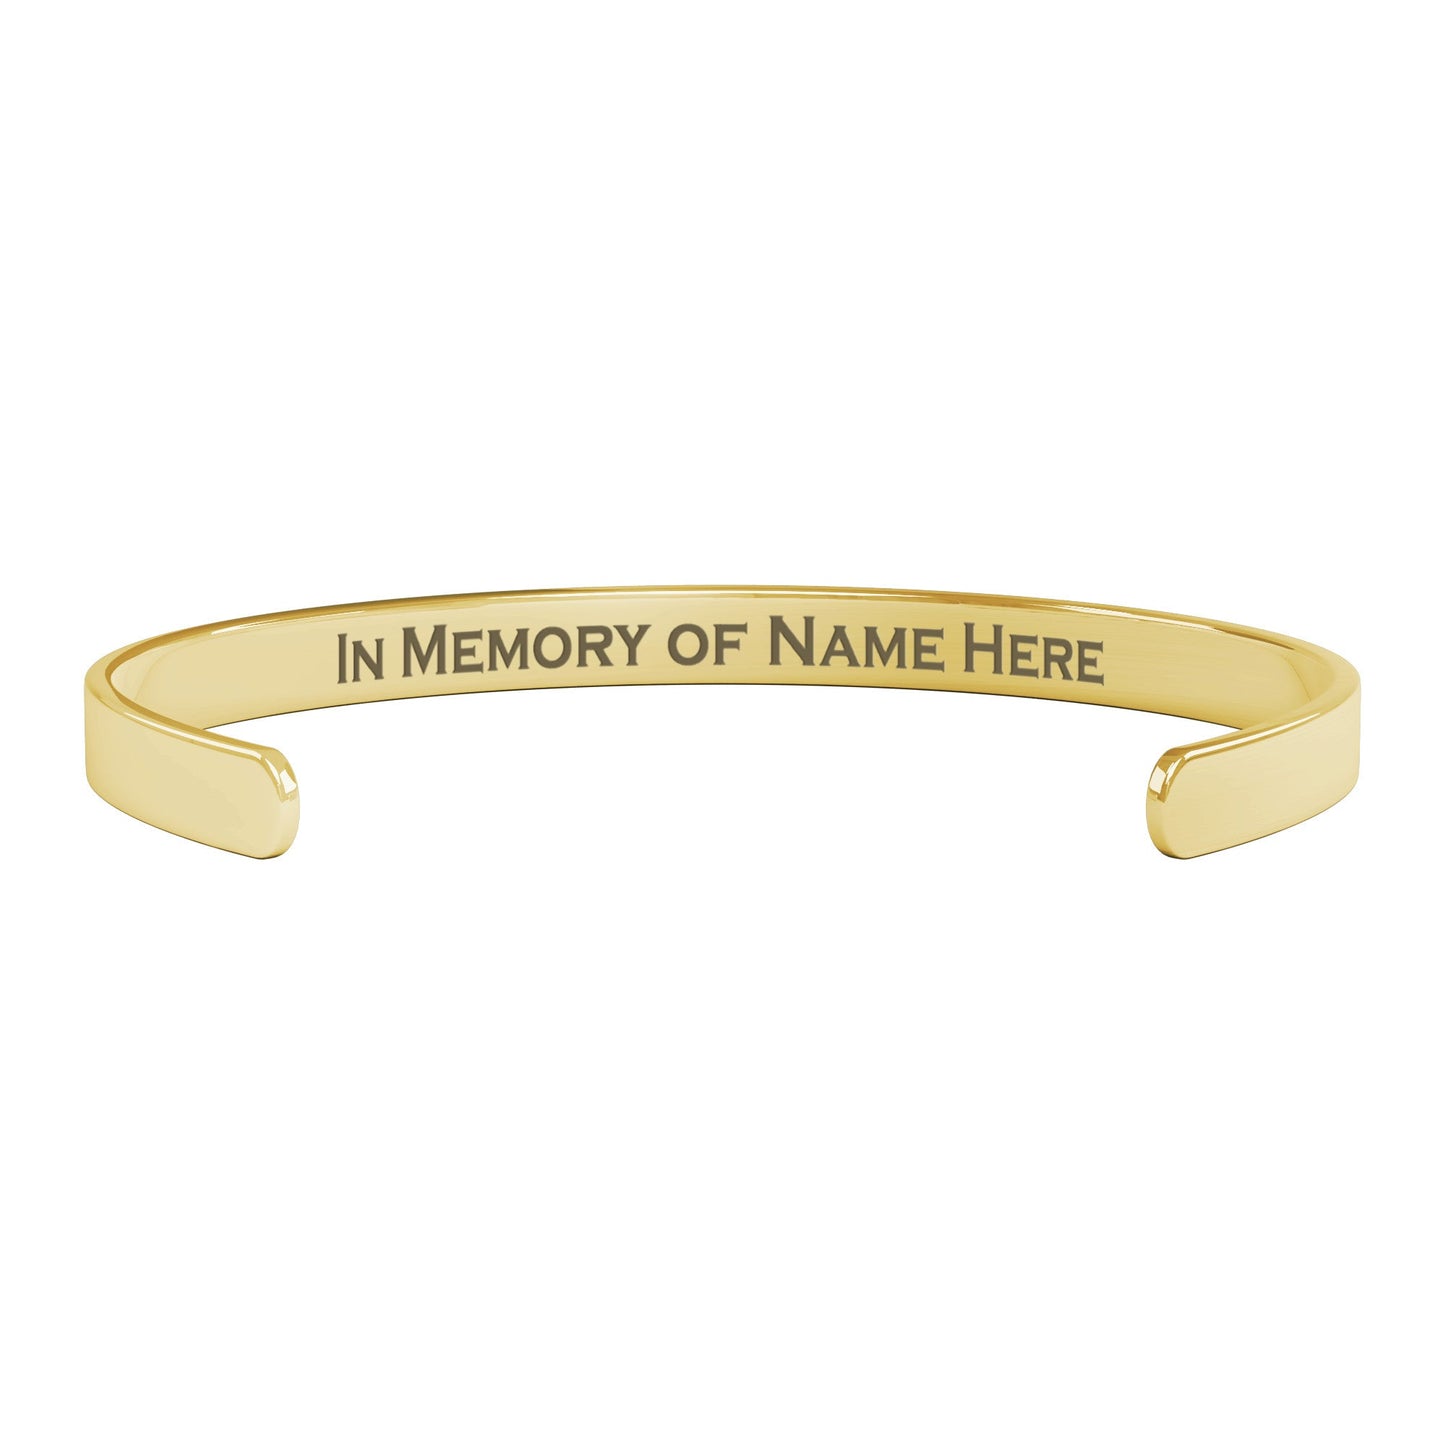 Personalized Cervical Cancer Awareness Cuff Bracelet |x|